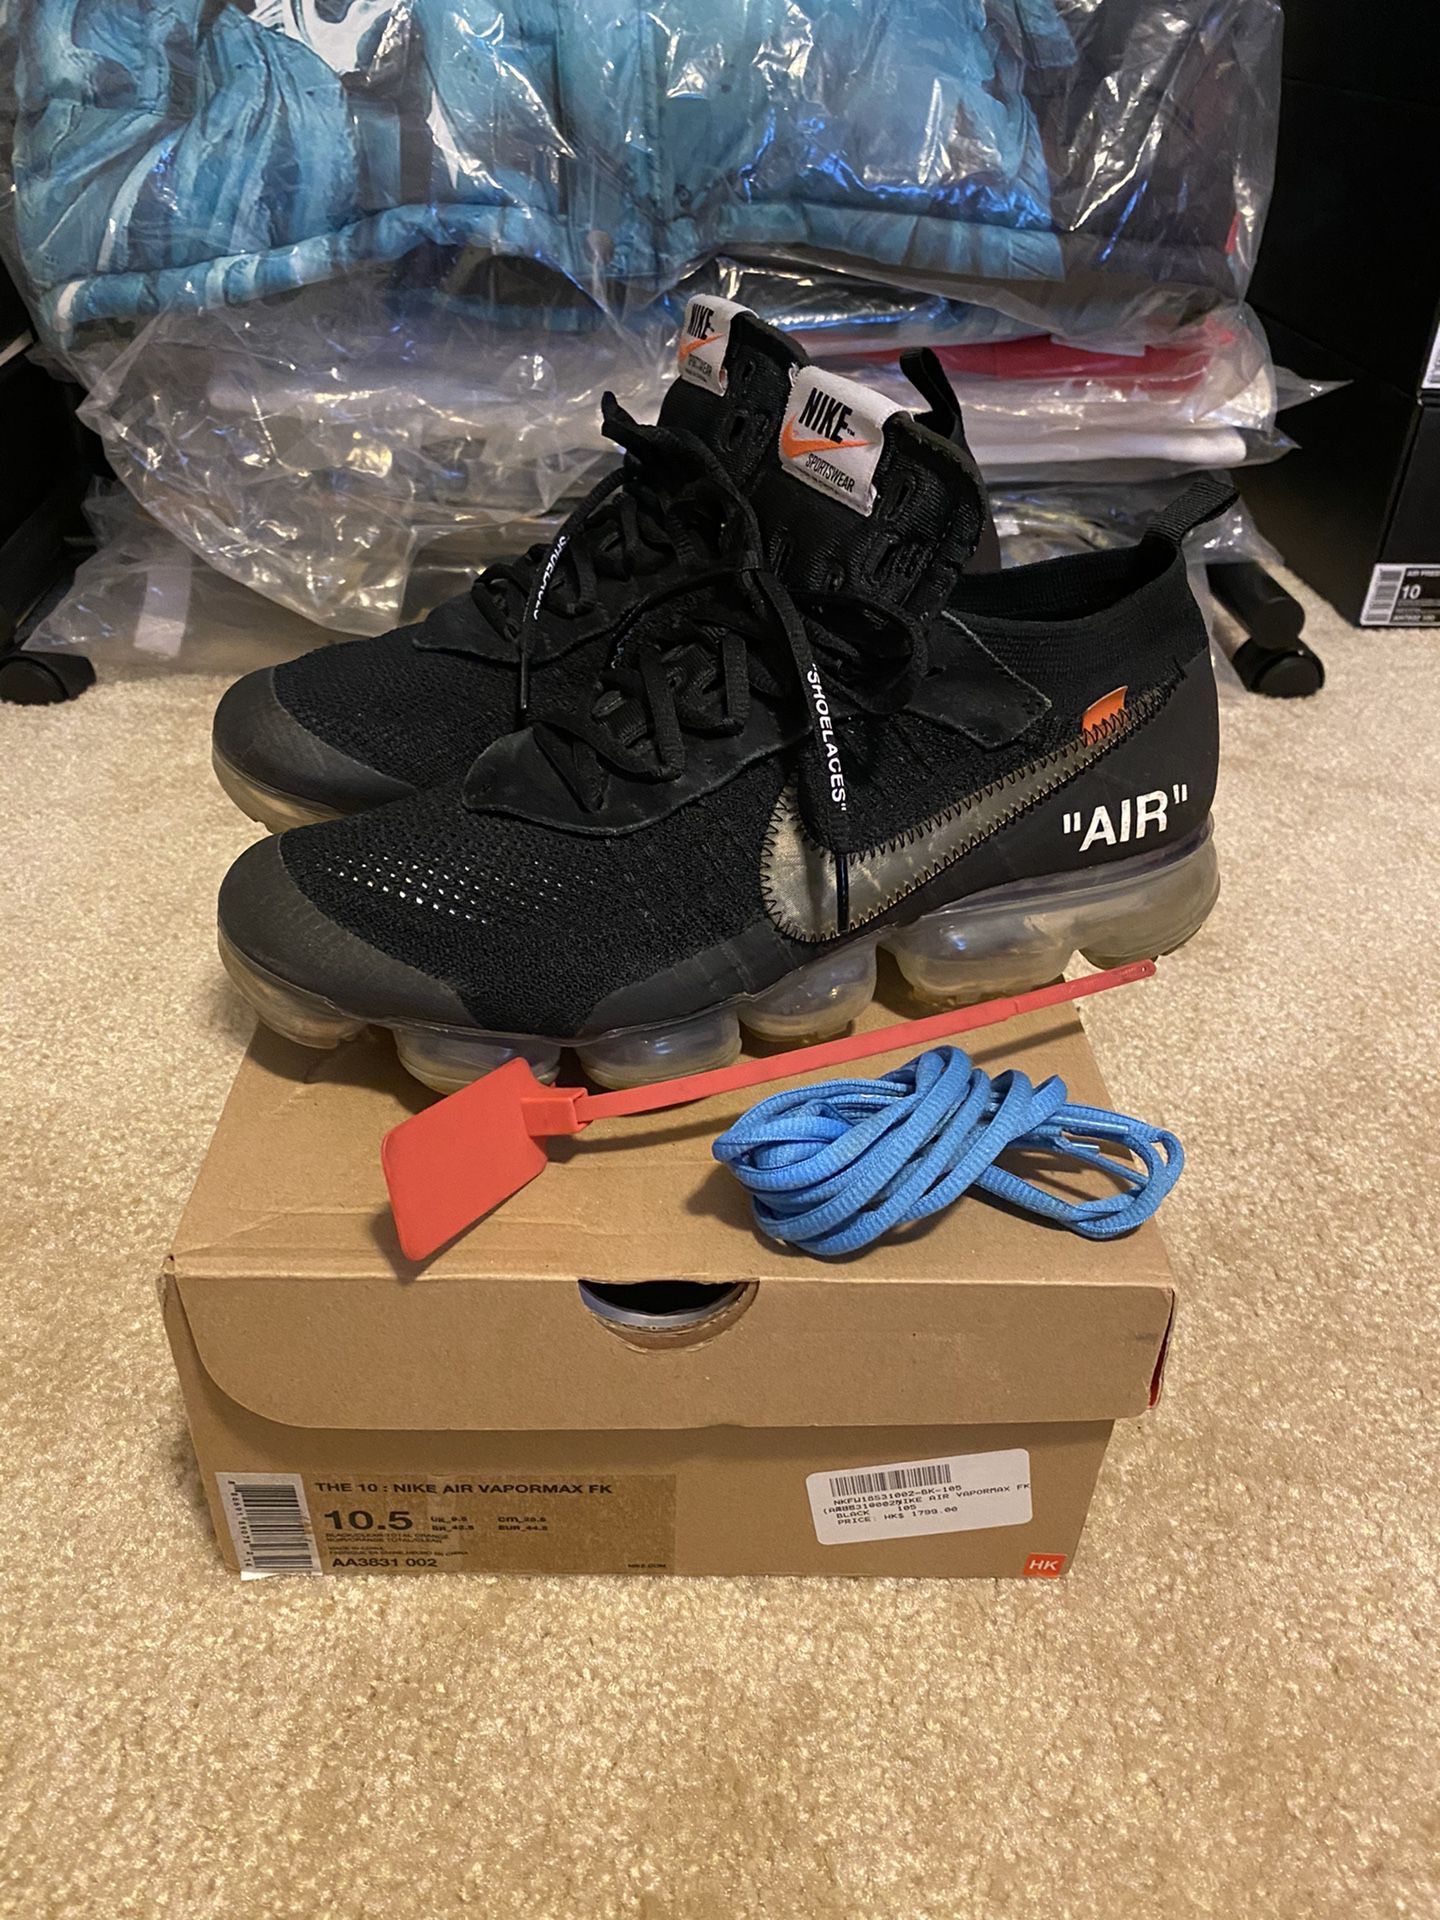 Nike X Offwhite Vapormax size 10.5 used off white